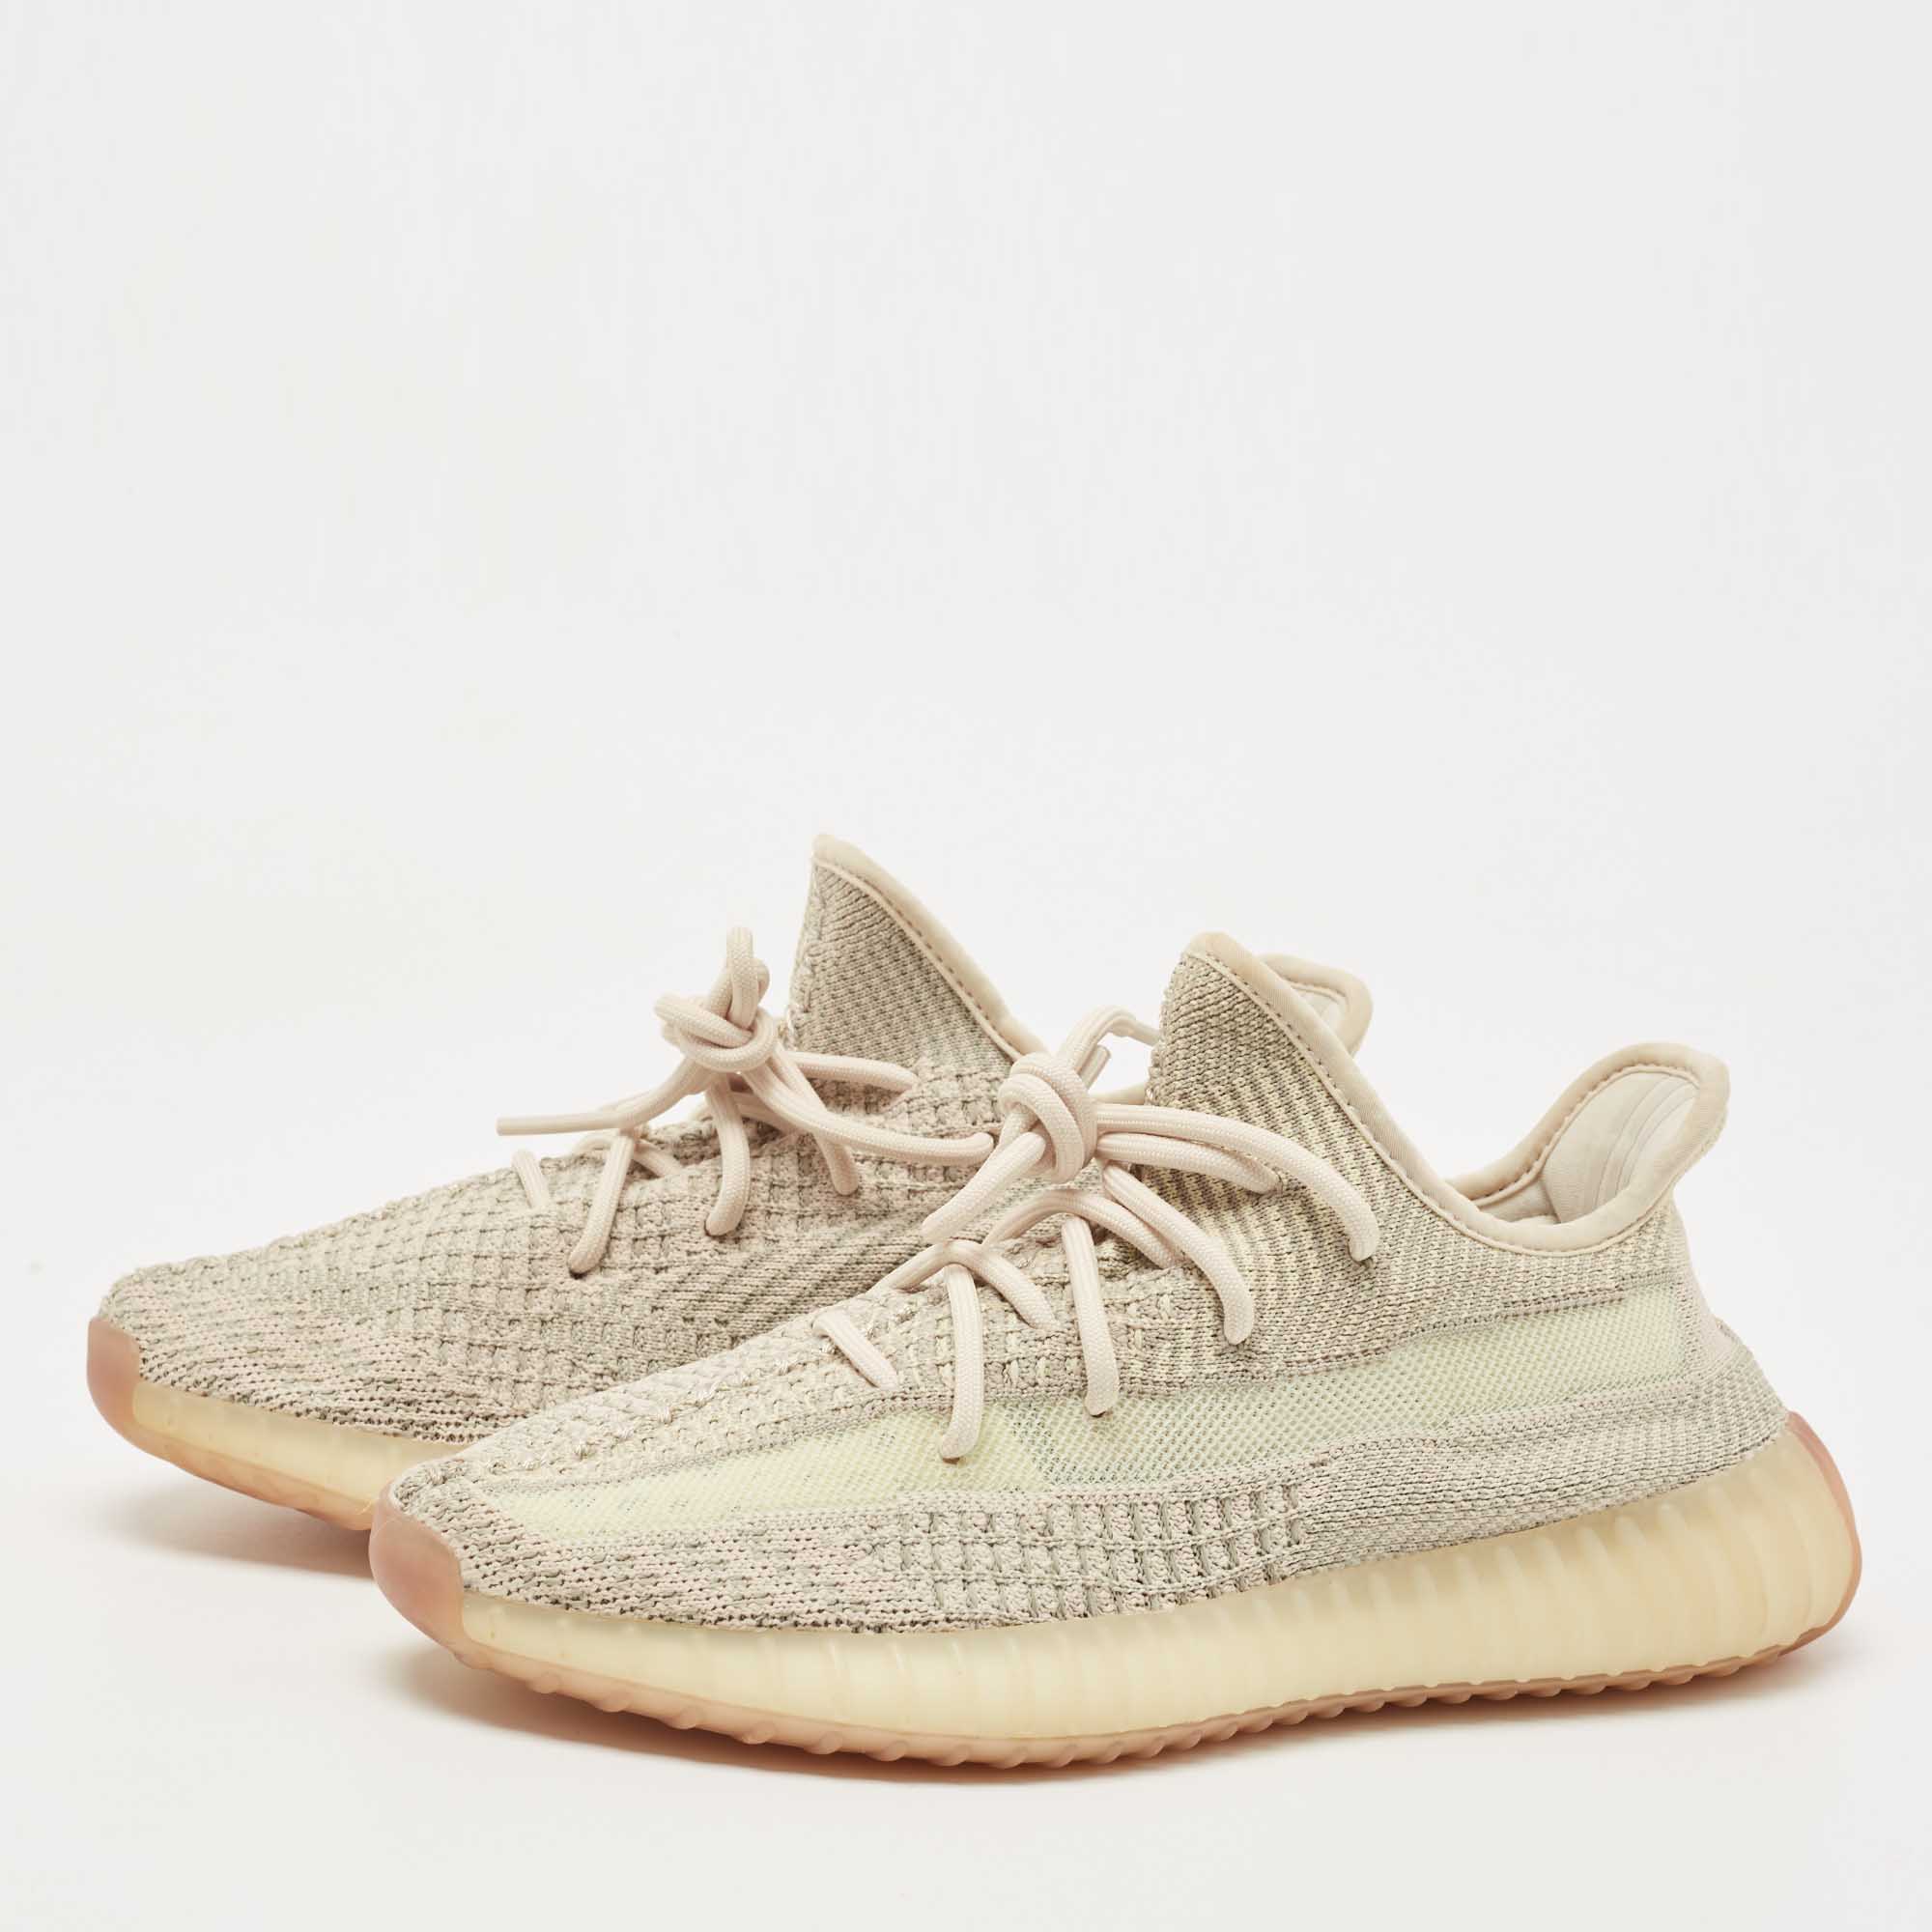 

Yeezy x Adidas Two Tone Knit Fabric Boost 350 V2 Citrin (Non Reflective) Sneakers Size, Beige